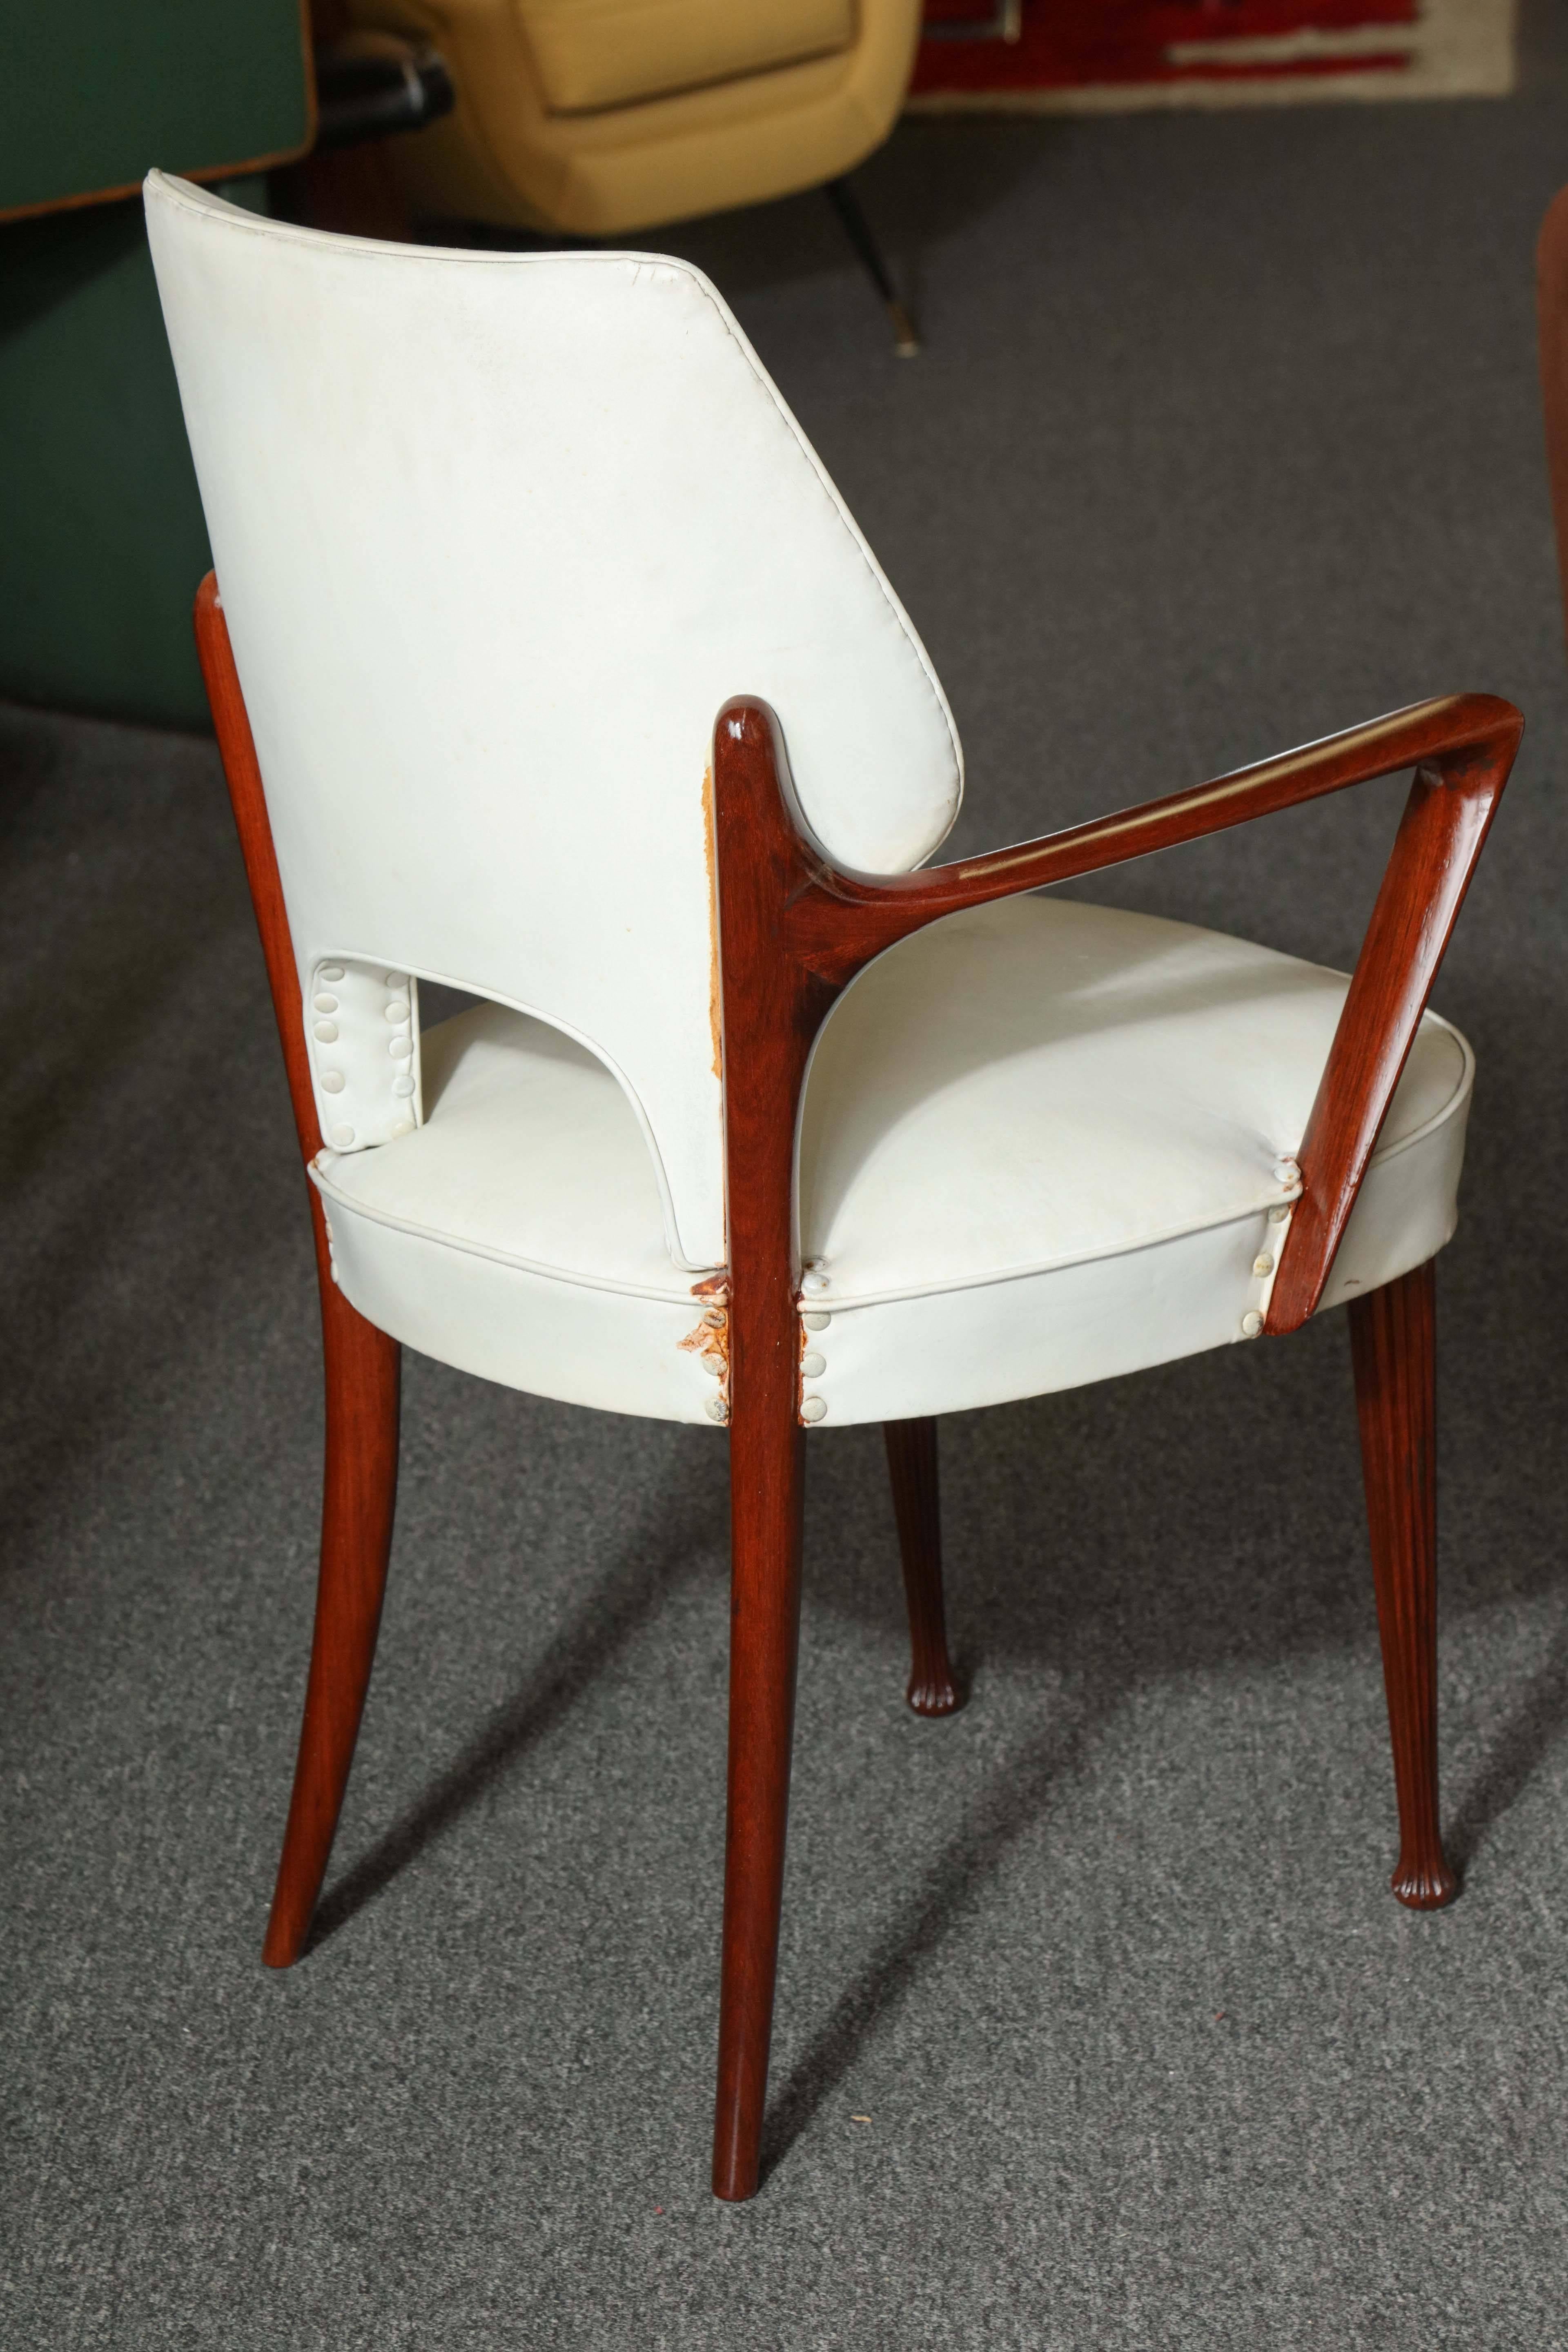 Mid-20th Century Four Dassi Chairs Made in Milan